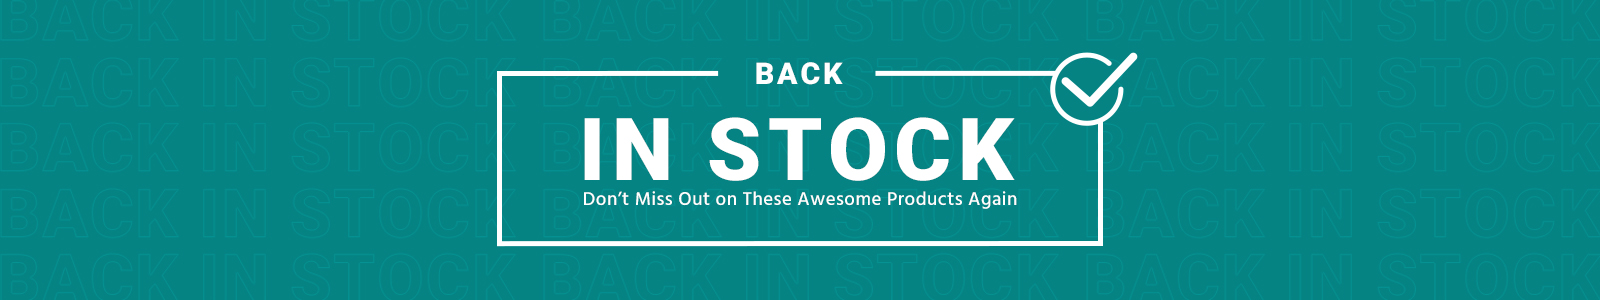 Back in Stock
Don’t Miss Out on These Awesome Products Again